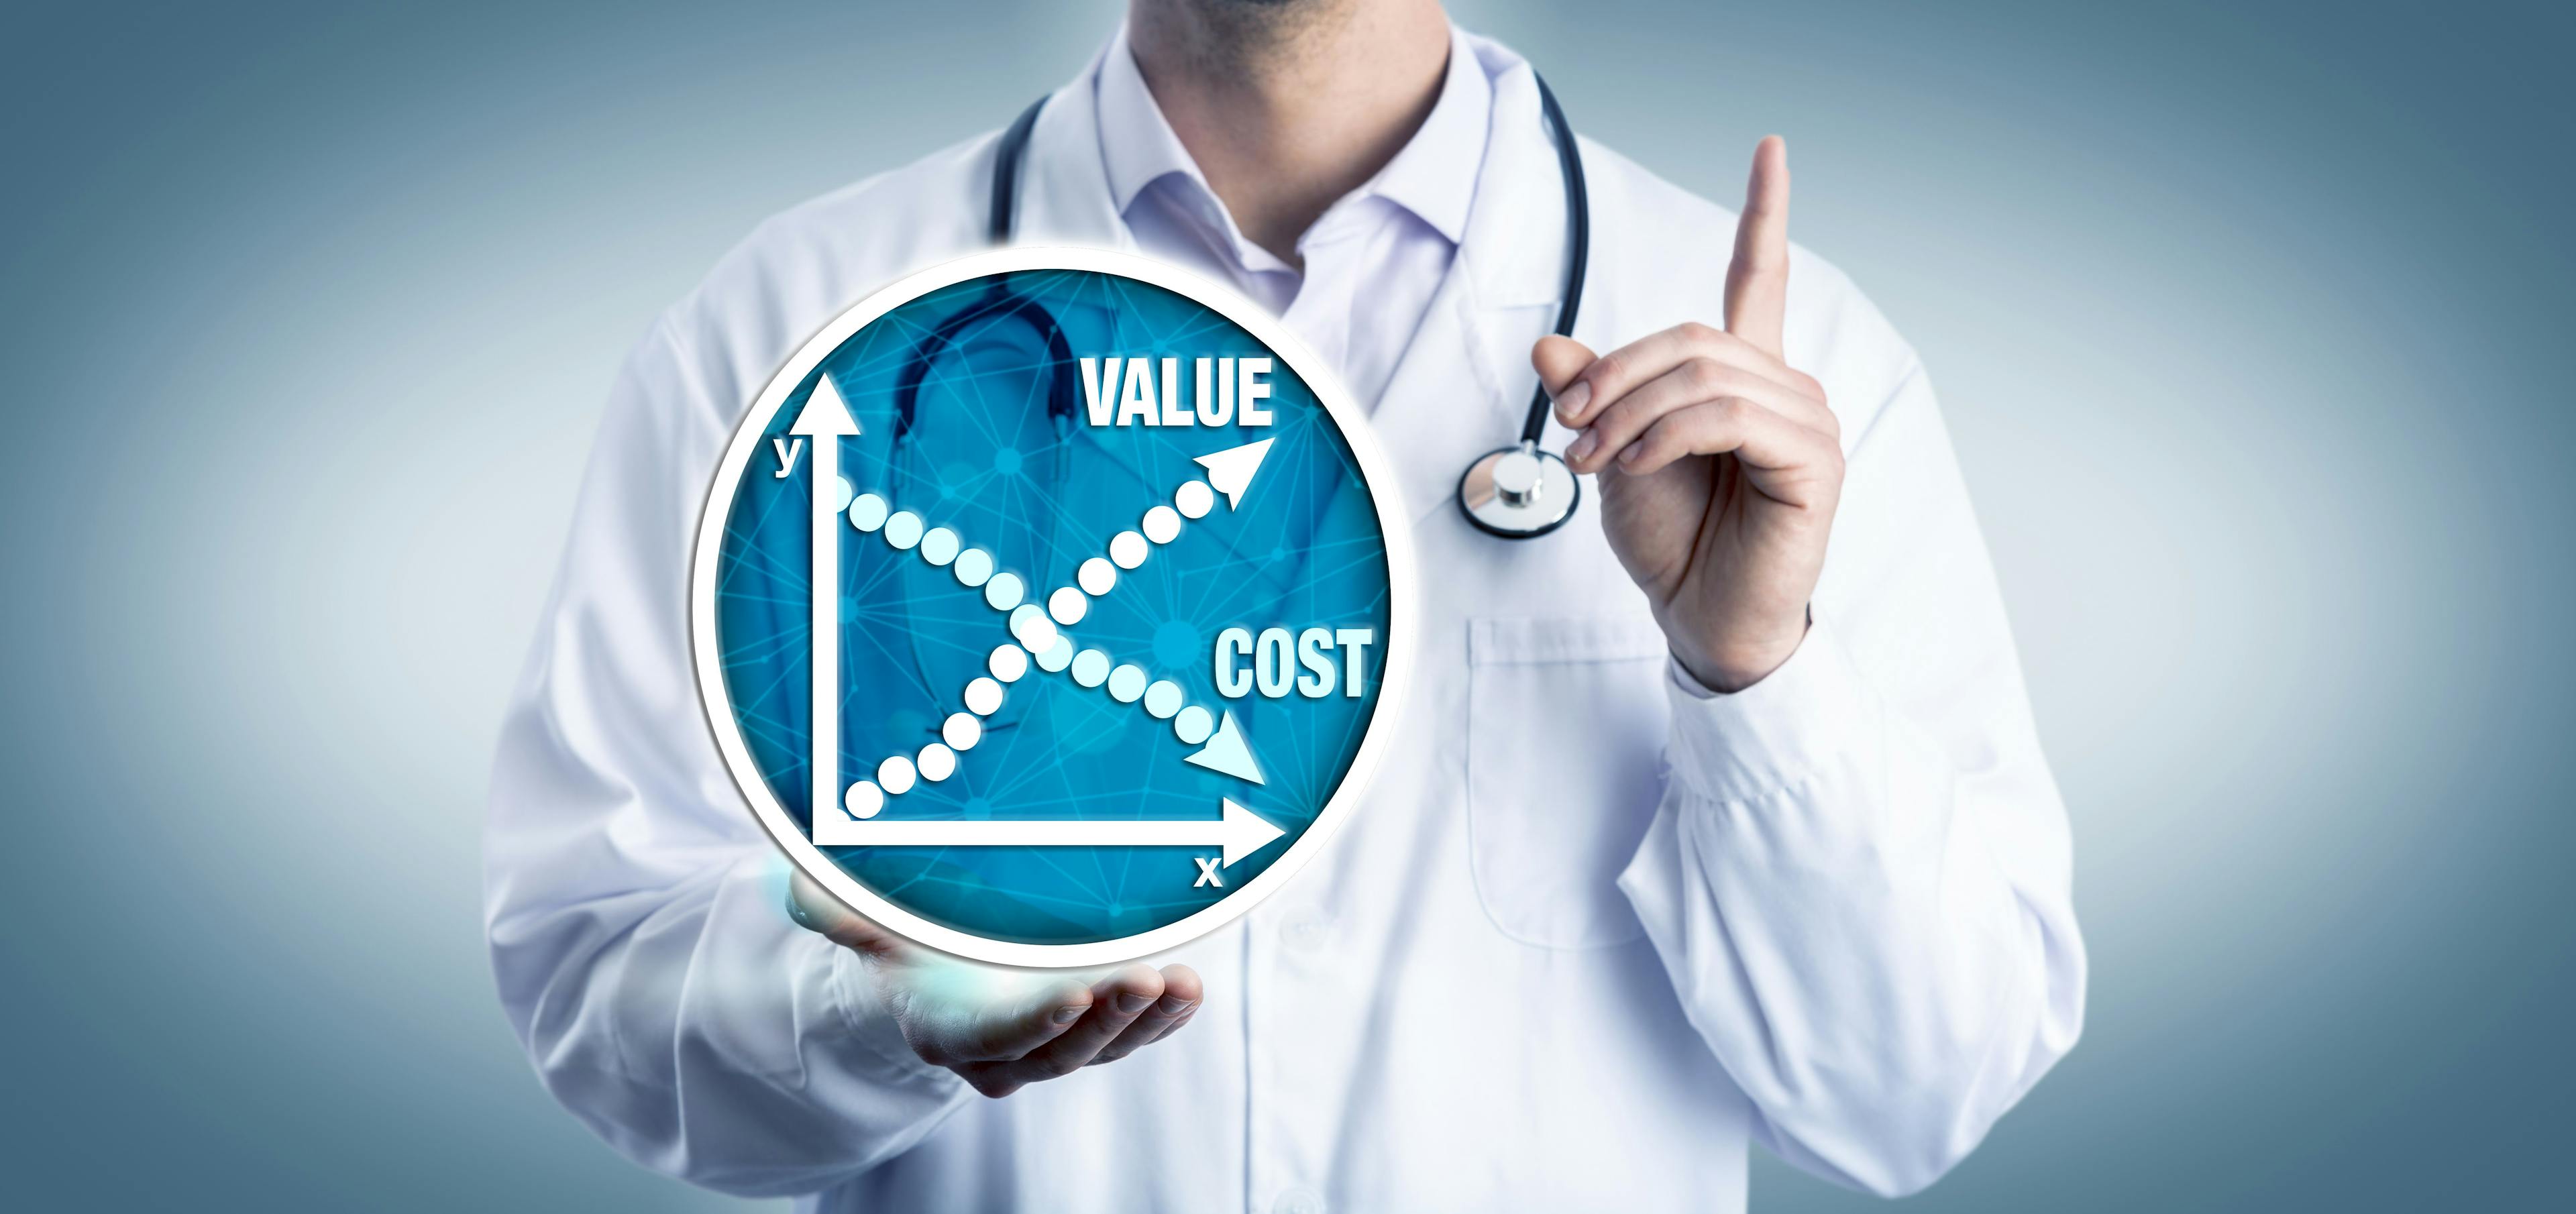 UCSF Research: No Synergy From Valued-based Programs for Primary Care Organizations